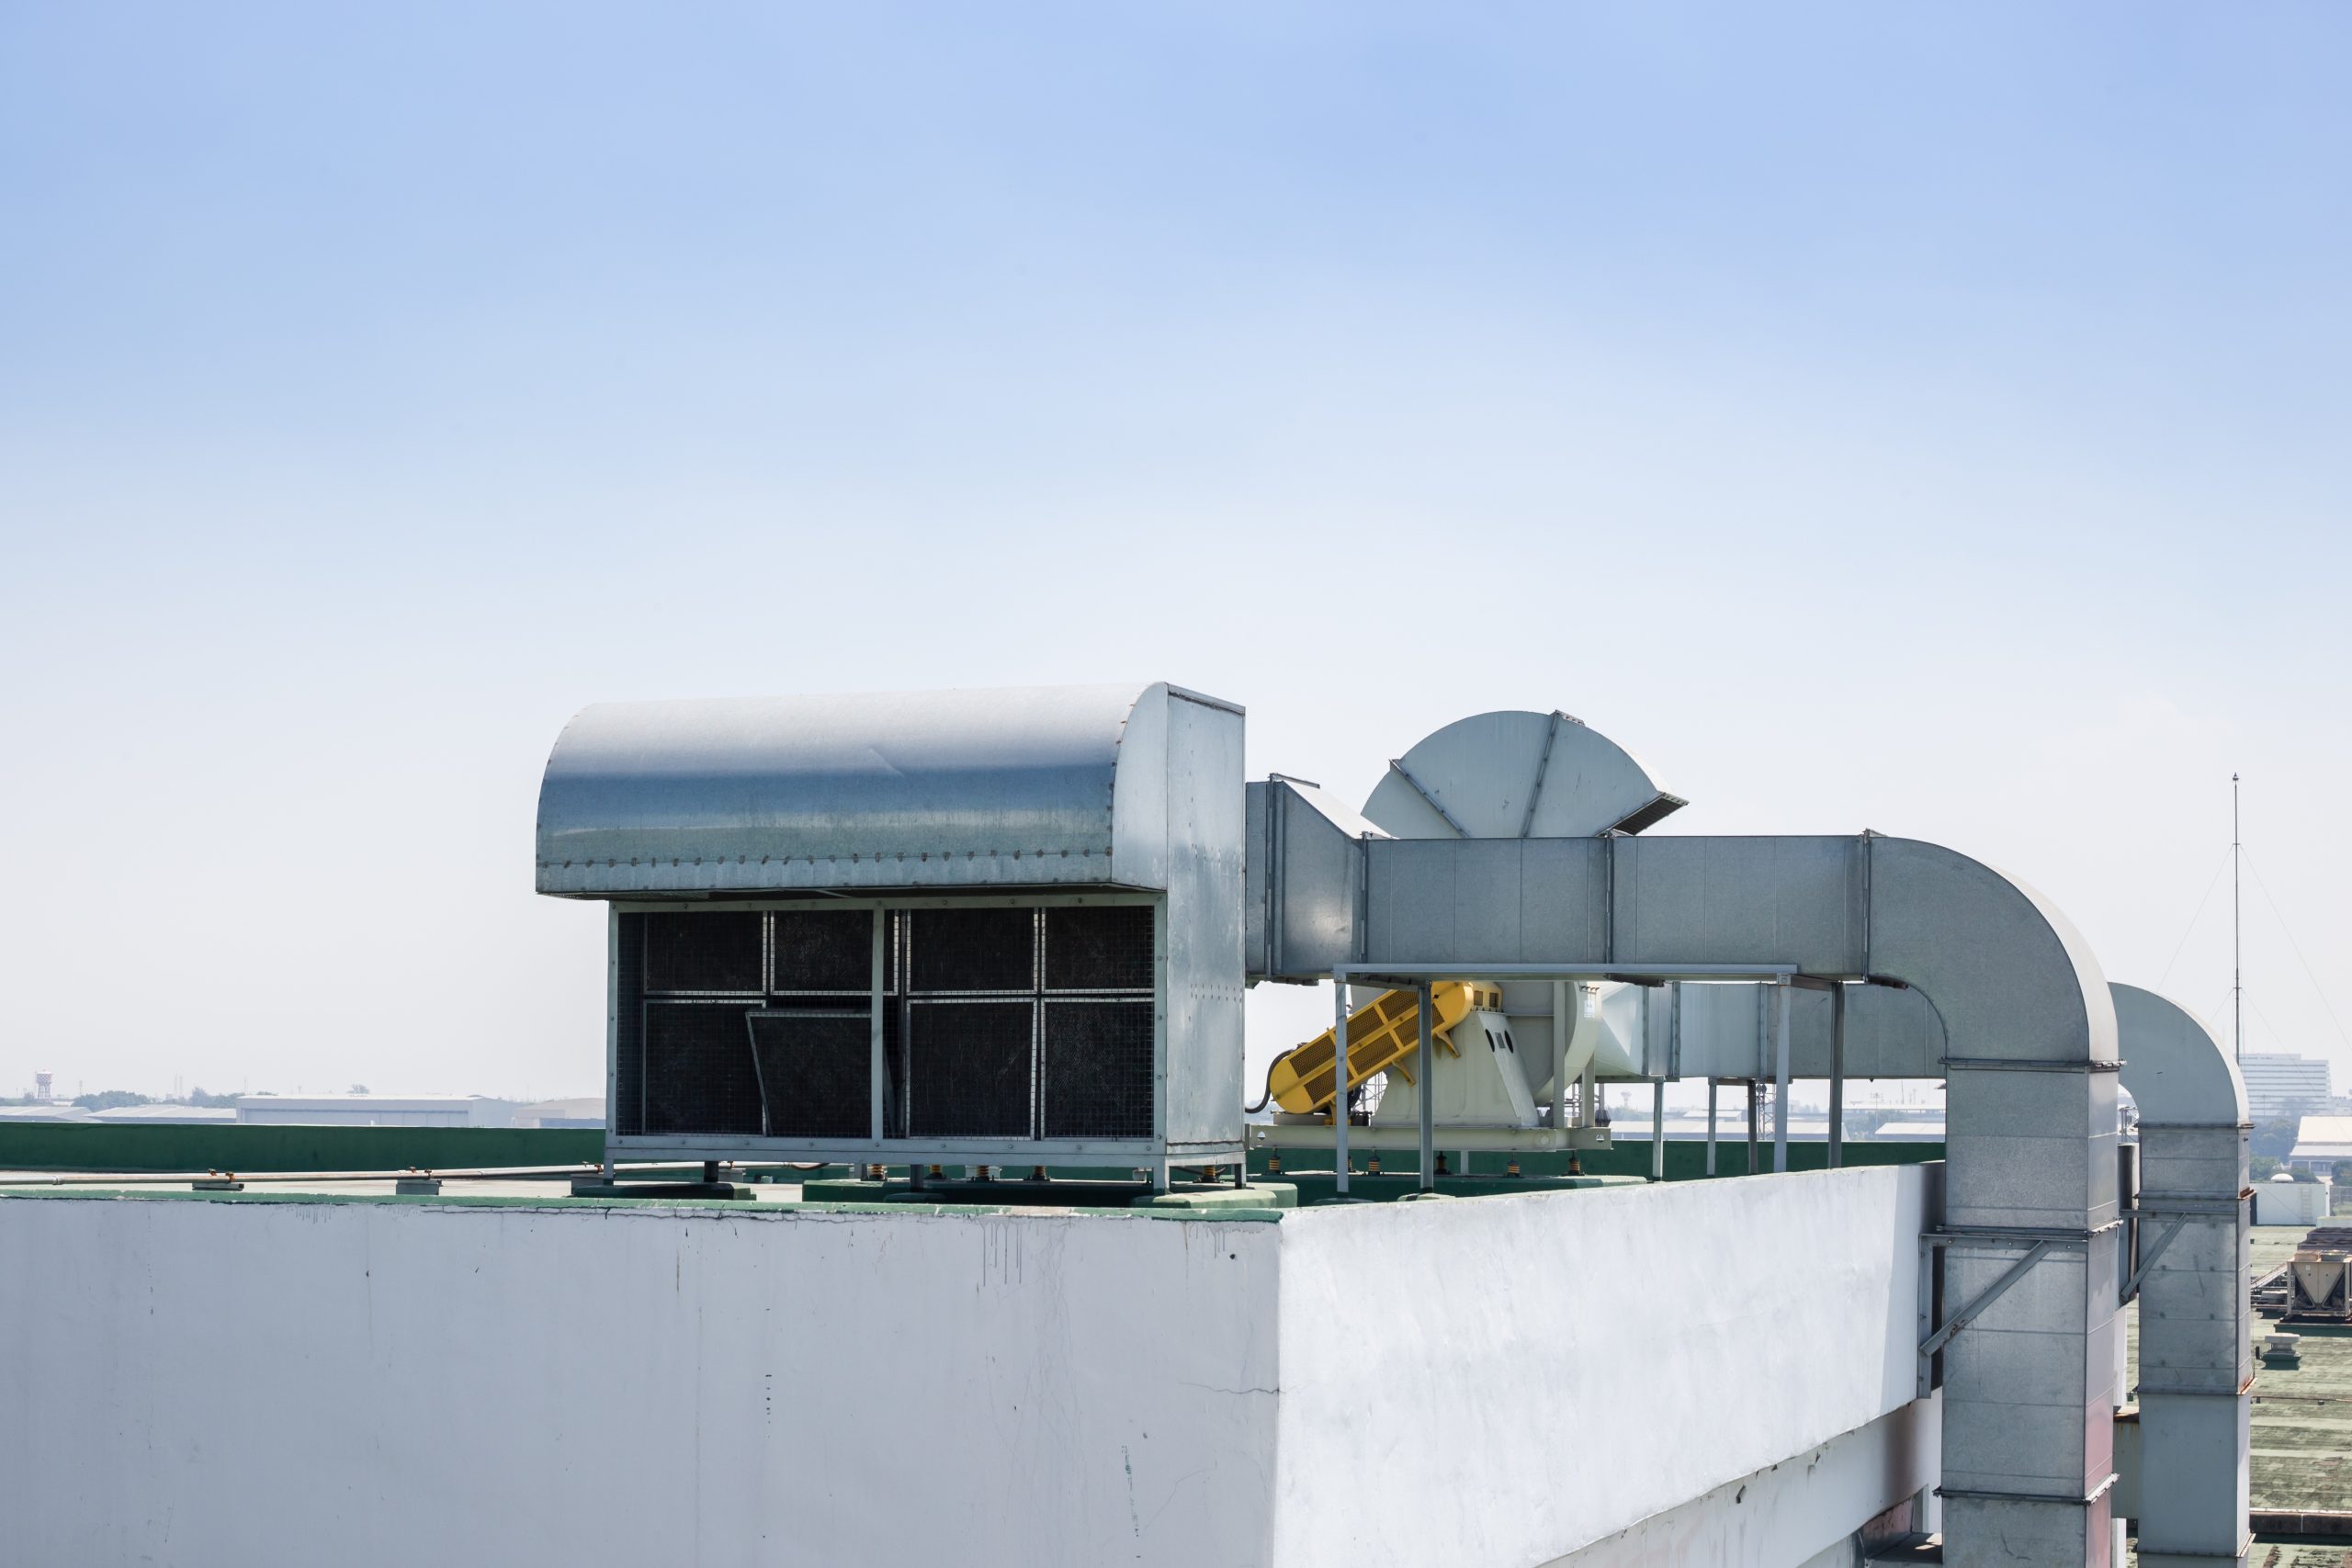 Proper outdoor HVAC air flow measurement is critical for commercial buildings and facilities.